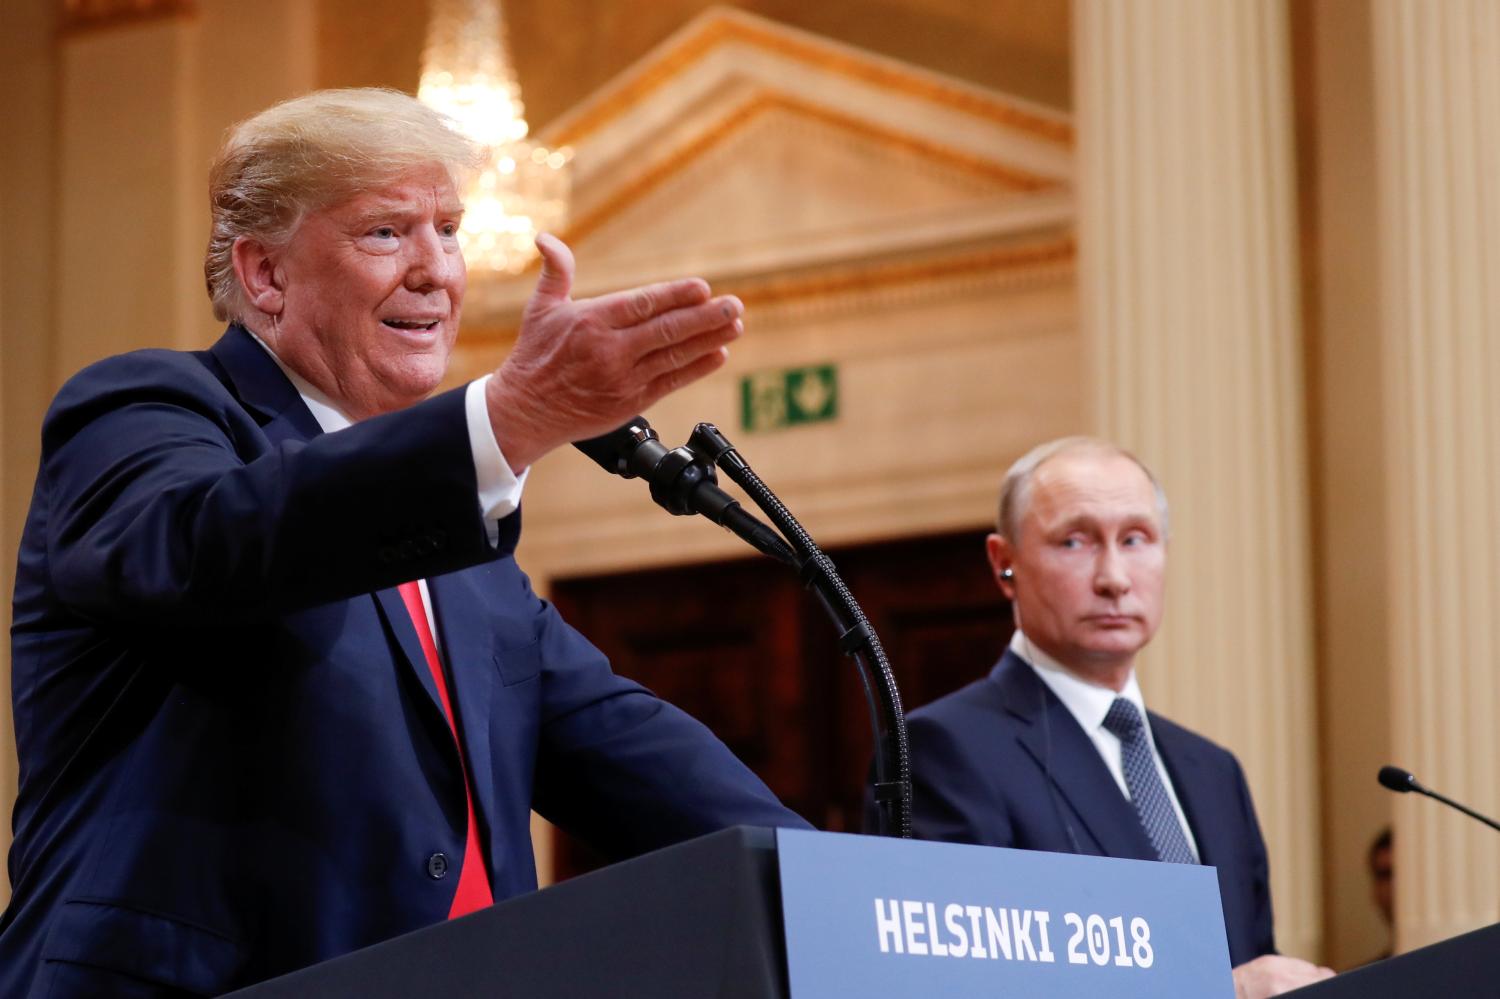 U.S. President Donald Trump gestures during a joint news conference with Russia's President Vladimir Putin after their meeting in Helsinki, Finland, July 16, 2018. REUTERS/Kevin Lamarque - RC11FBFEF700